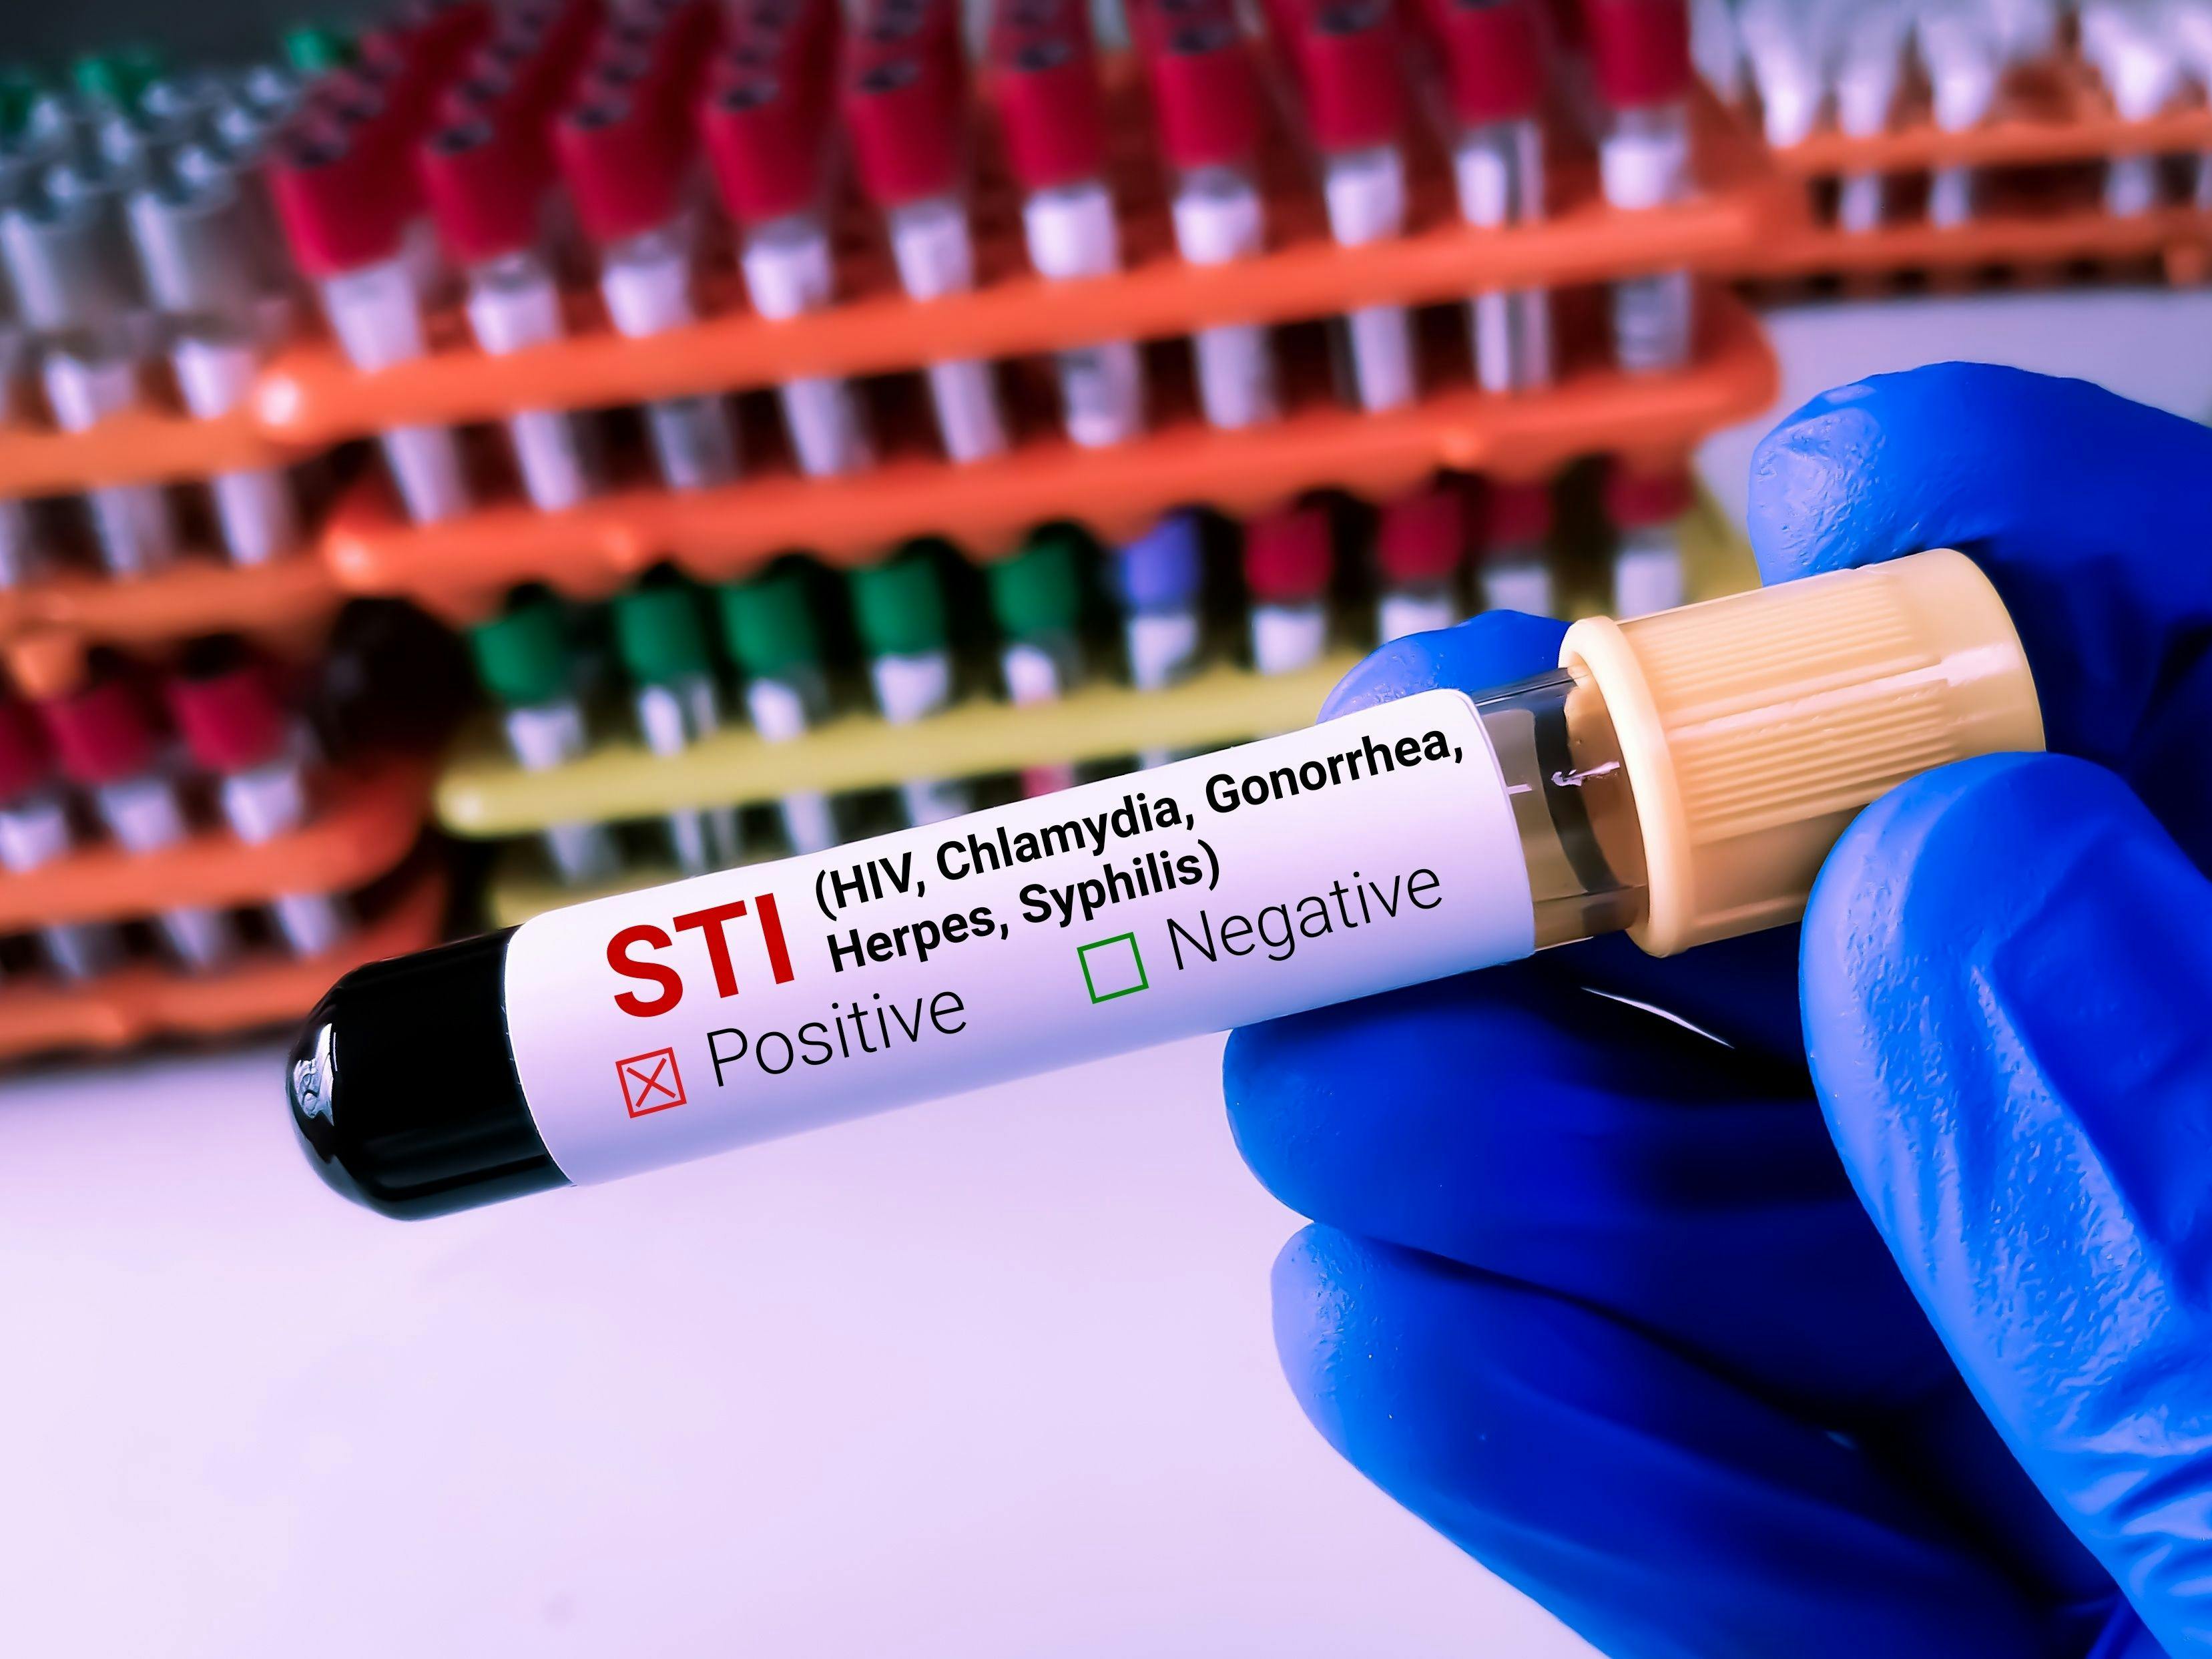 Image Credit: Should more adolescents get tested for STIs in pediatric emergency departments? © Saiful52 - ©  stock.adobe.com.